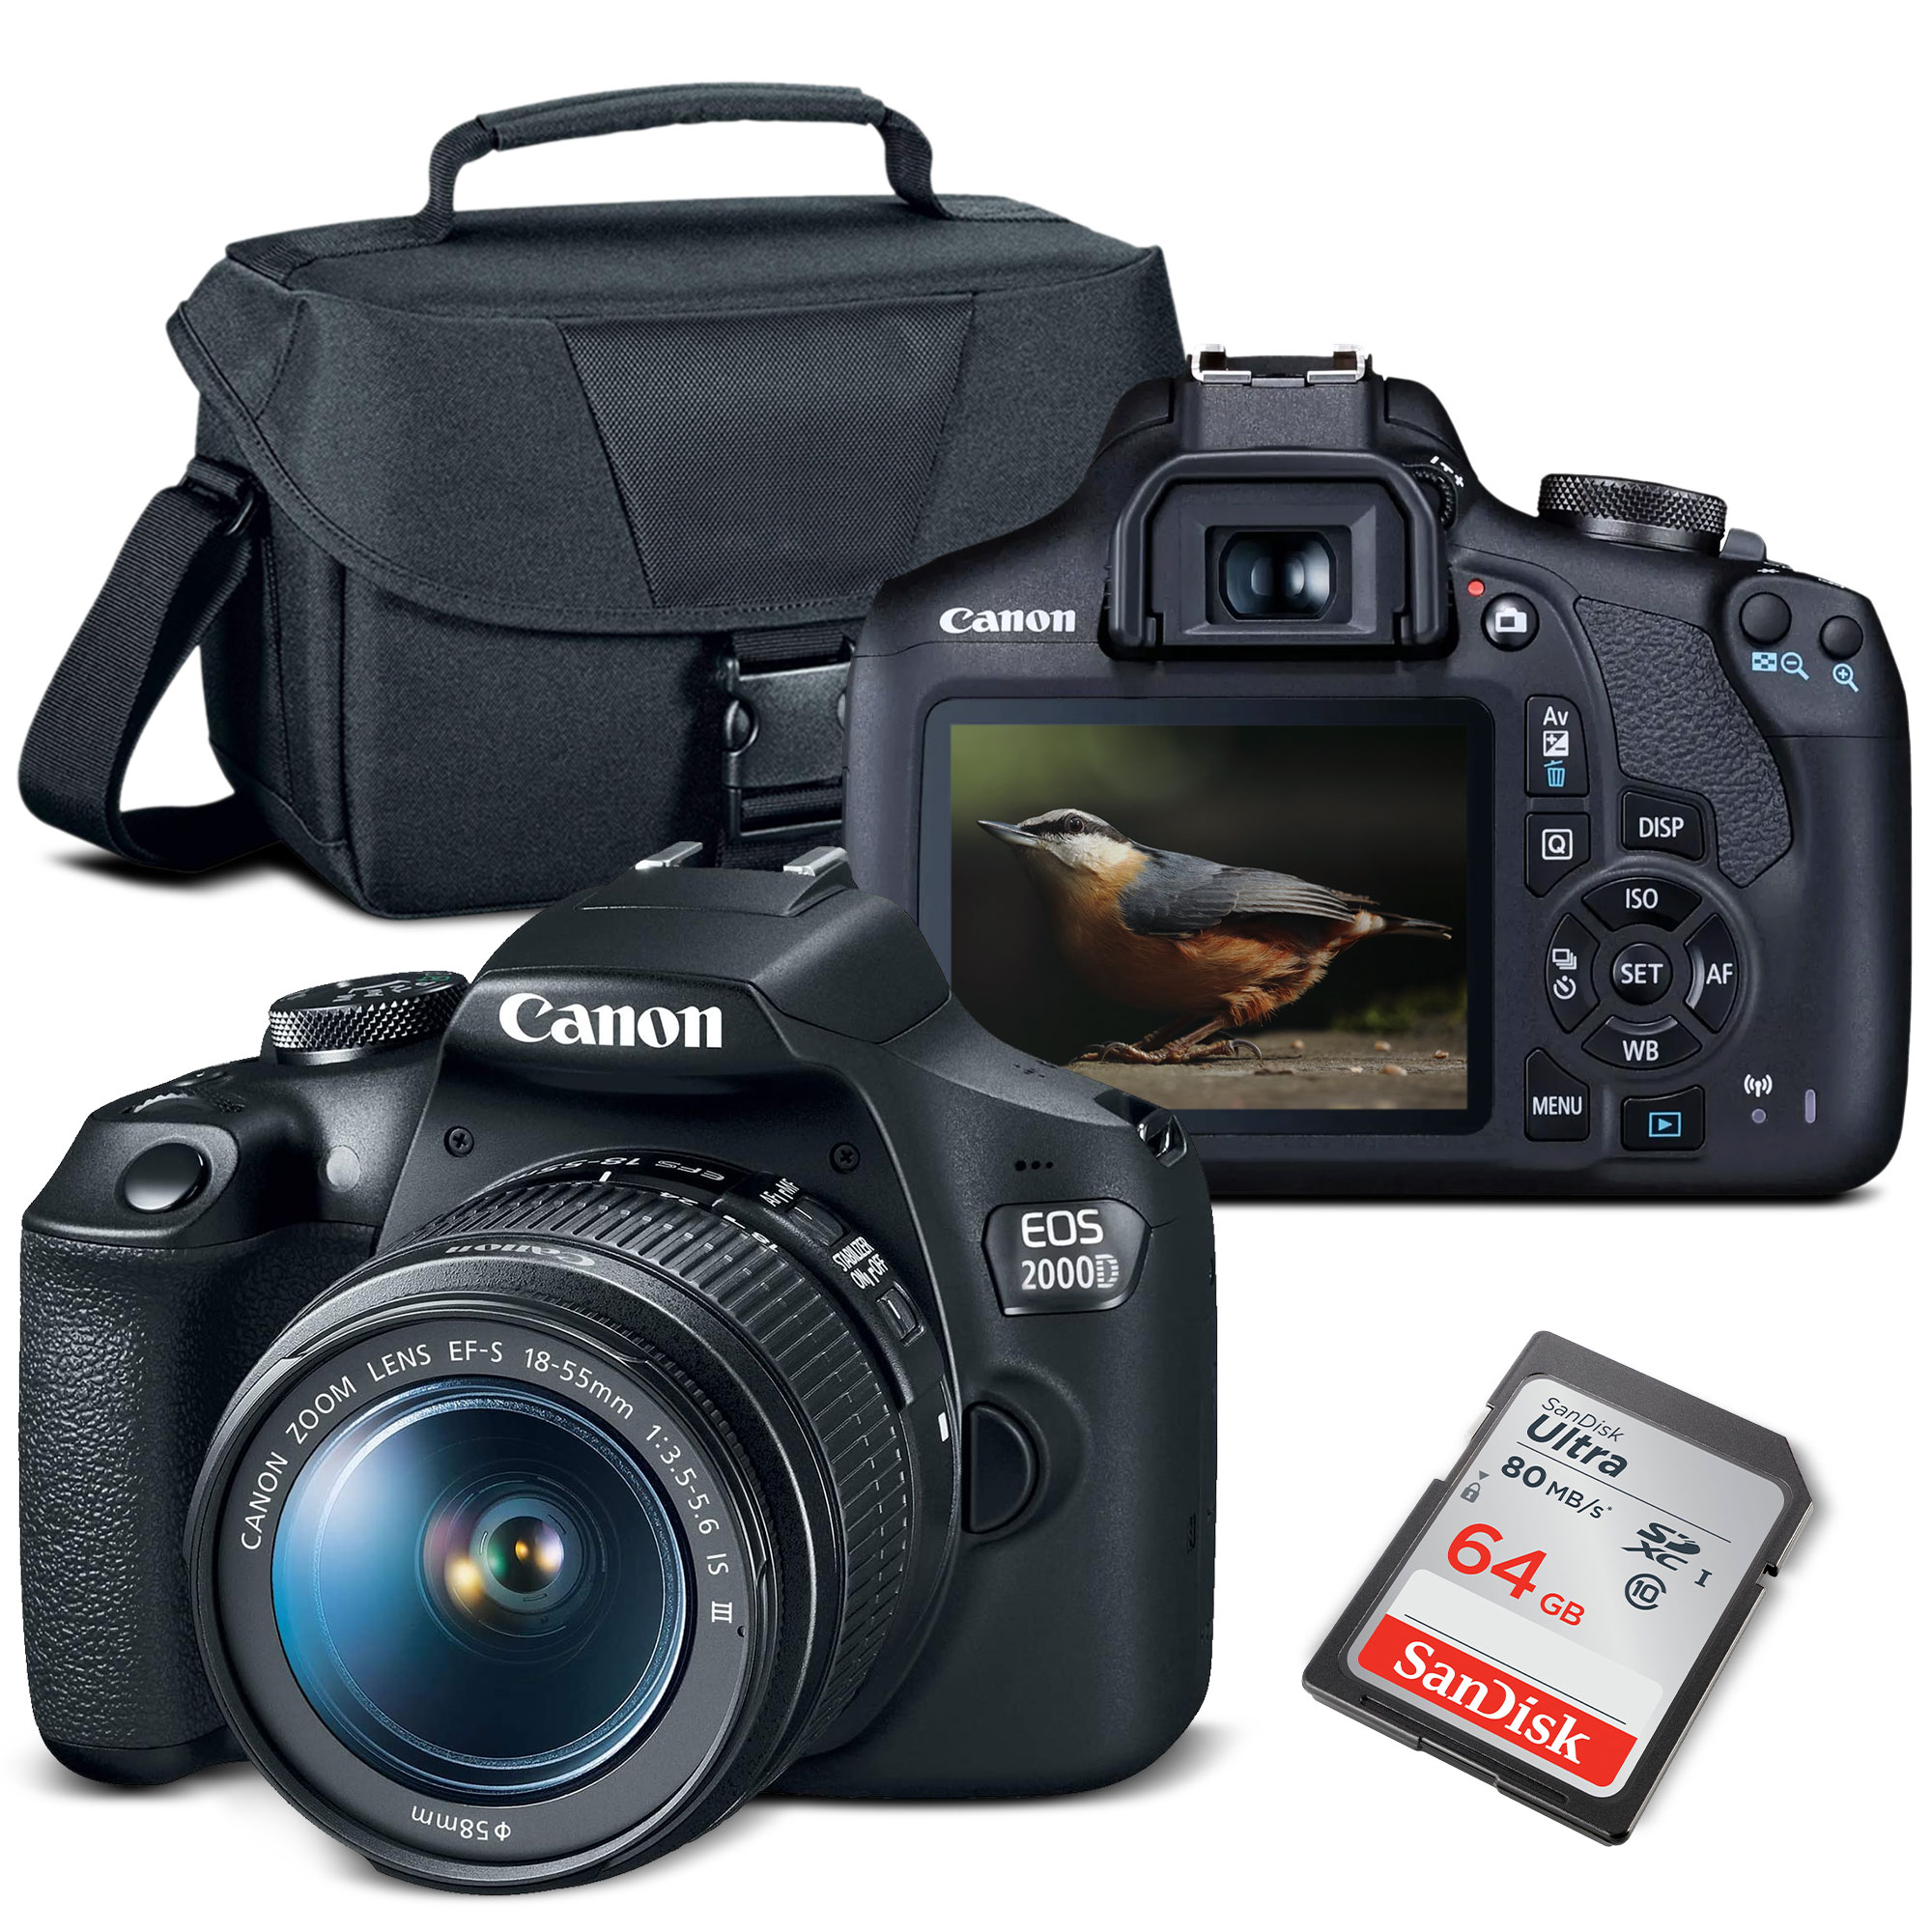 Canon EOS 2000D / Rebel T7 DSLR Camera with 18-55mm Lens + Bag + 64GB Card + More - image 1 of 5